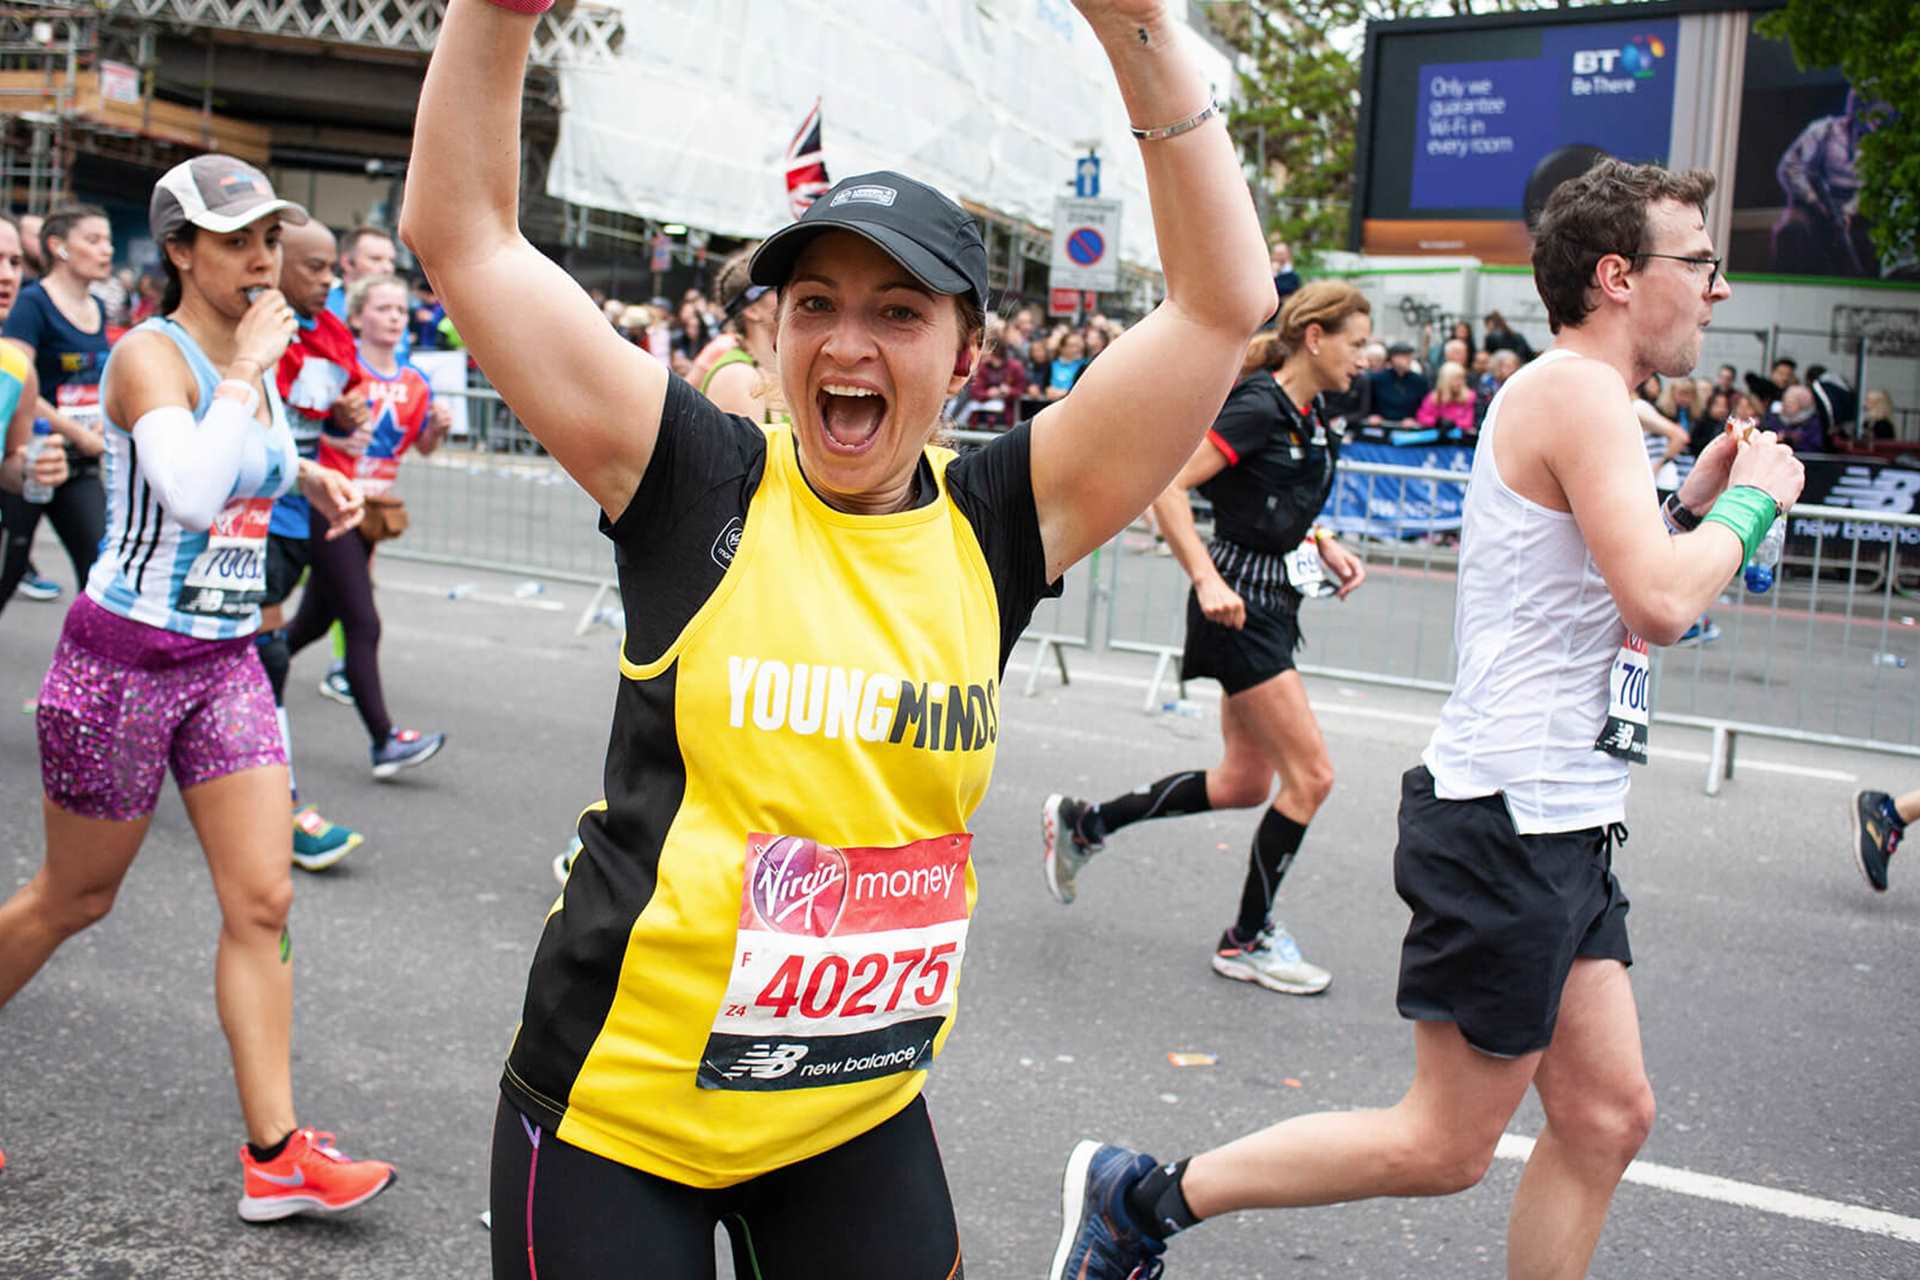 a YoungMinds supporter and runner smile to the camera to express her excitement during a running event